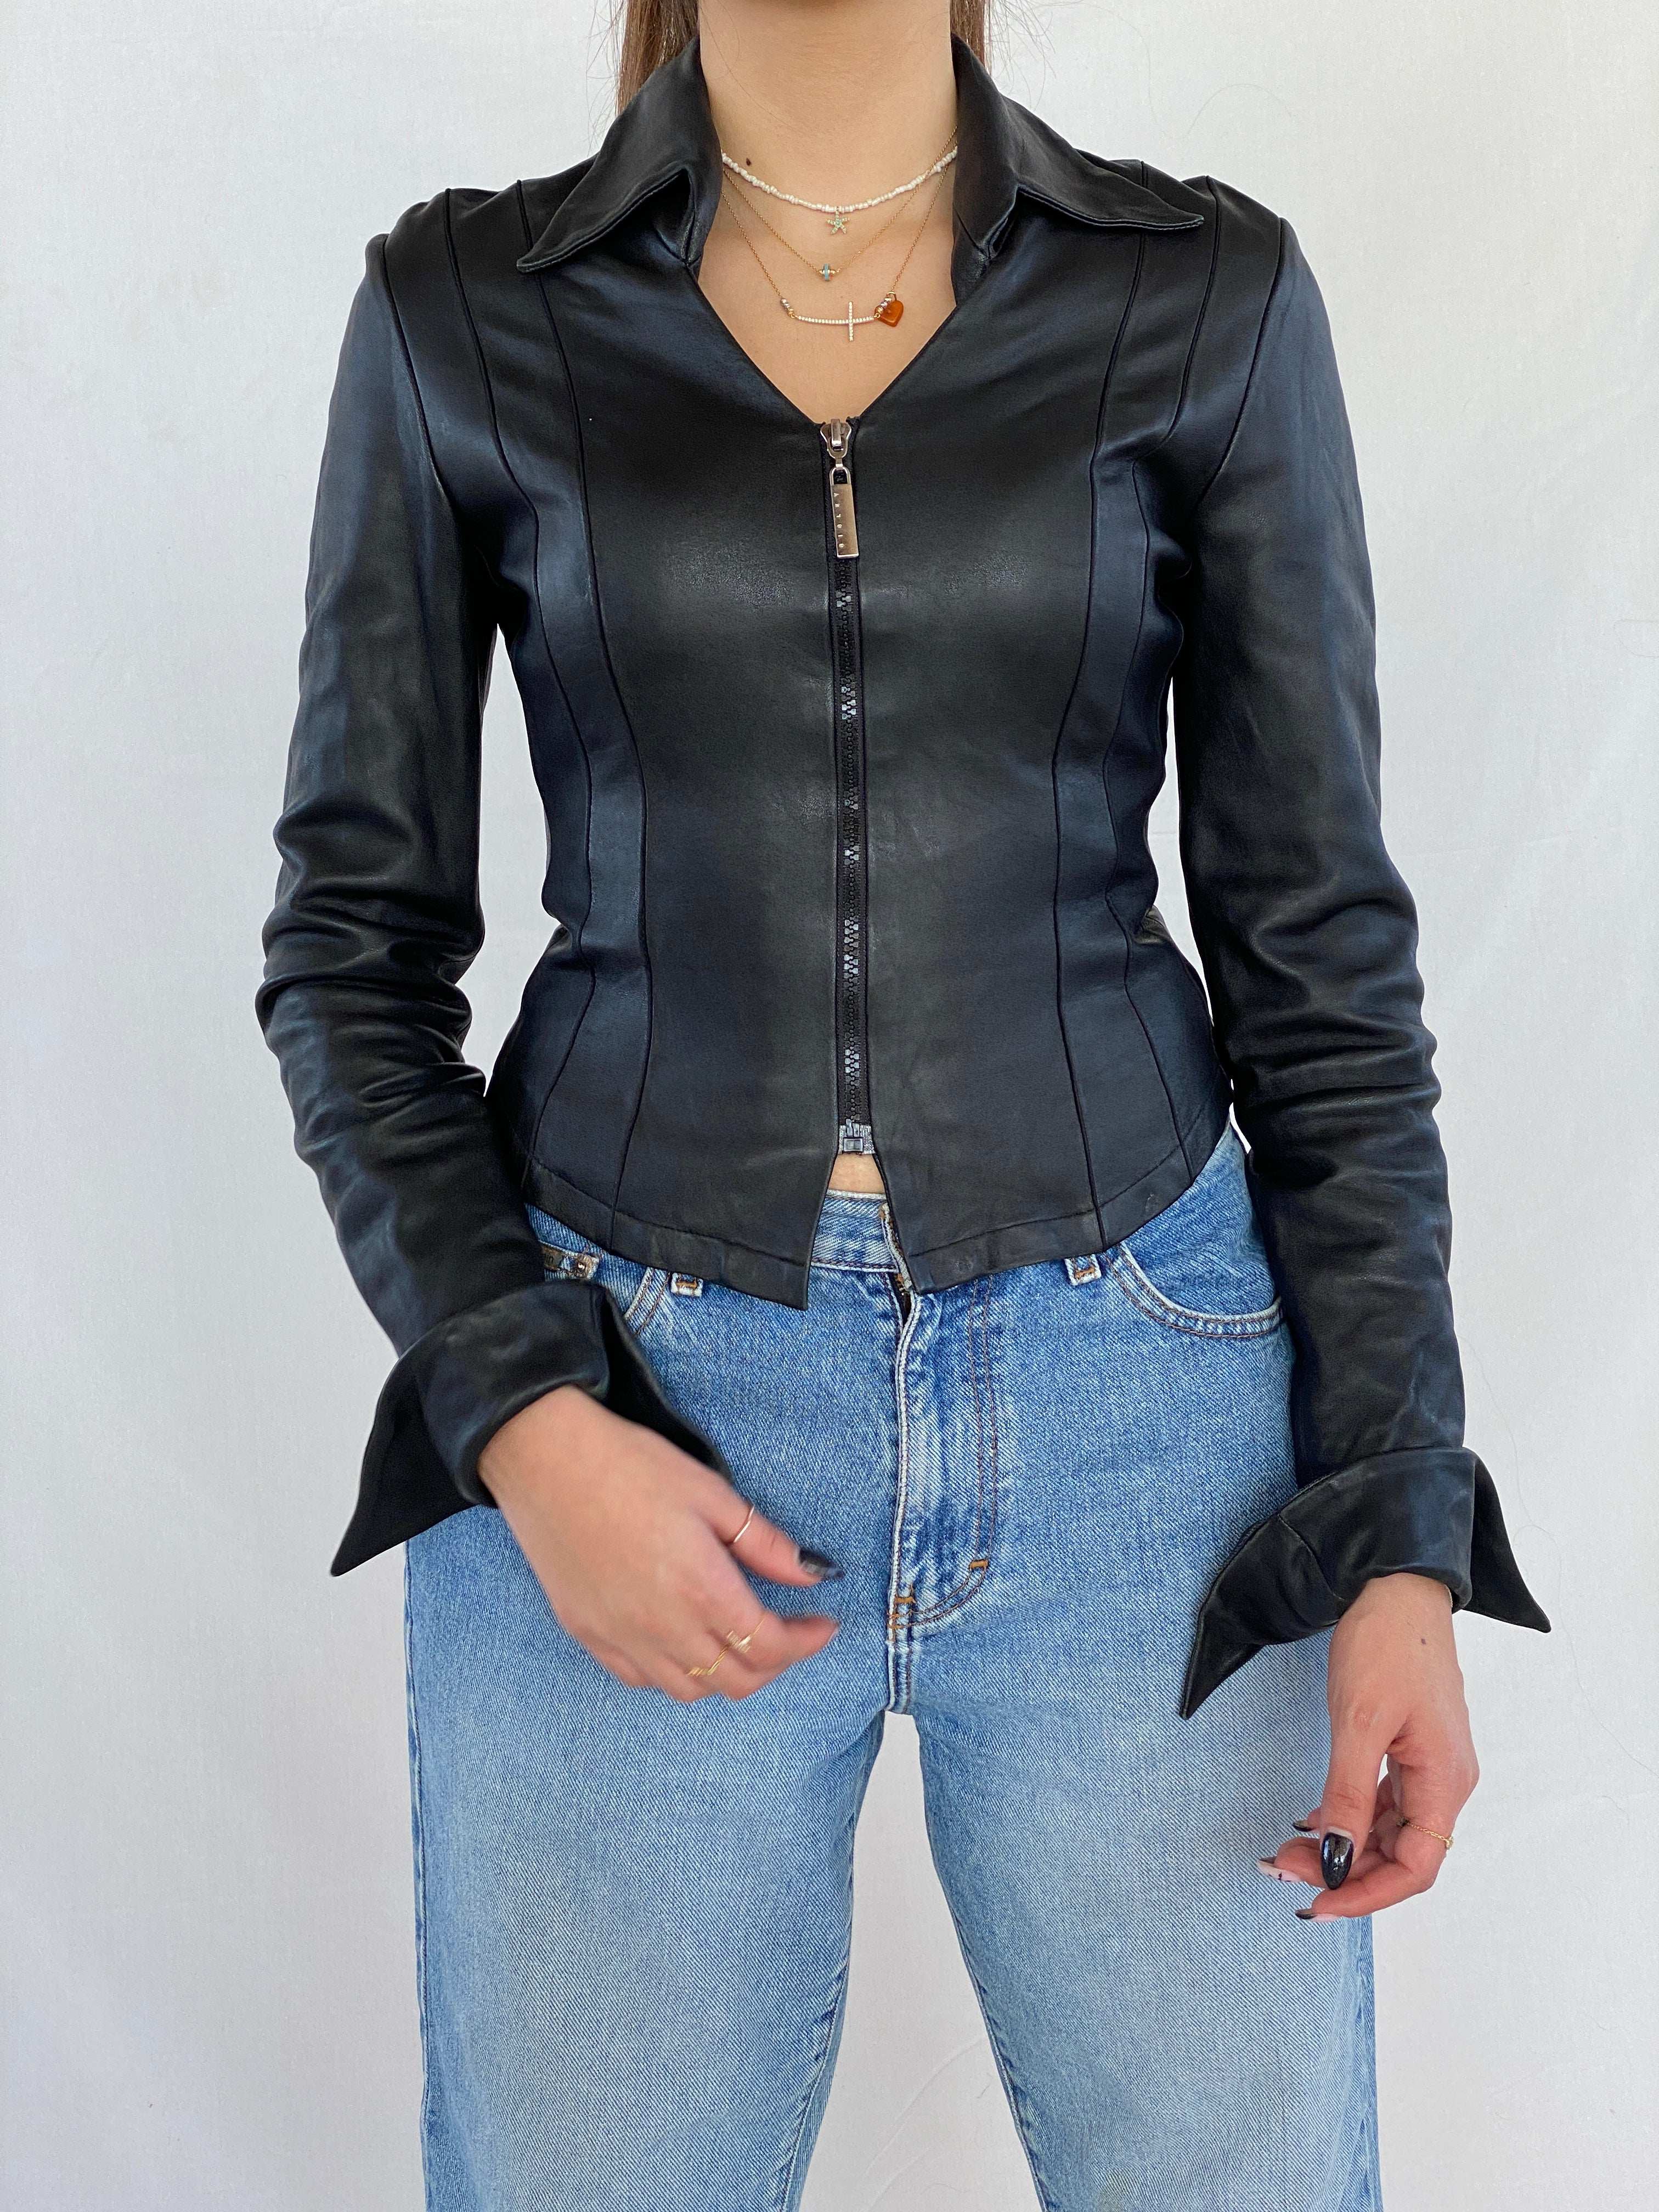 Vintage Fratti Genuine Leather Zip Up Top - Balagan Vintage Full Sleeve Top 00s,90s,black leather,genuine leather,Juana,NEW IN